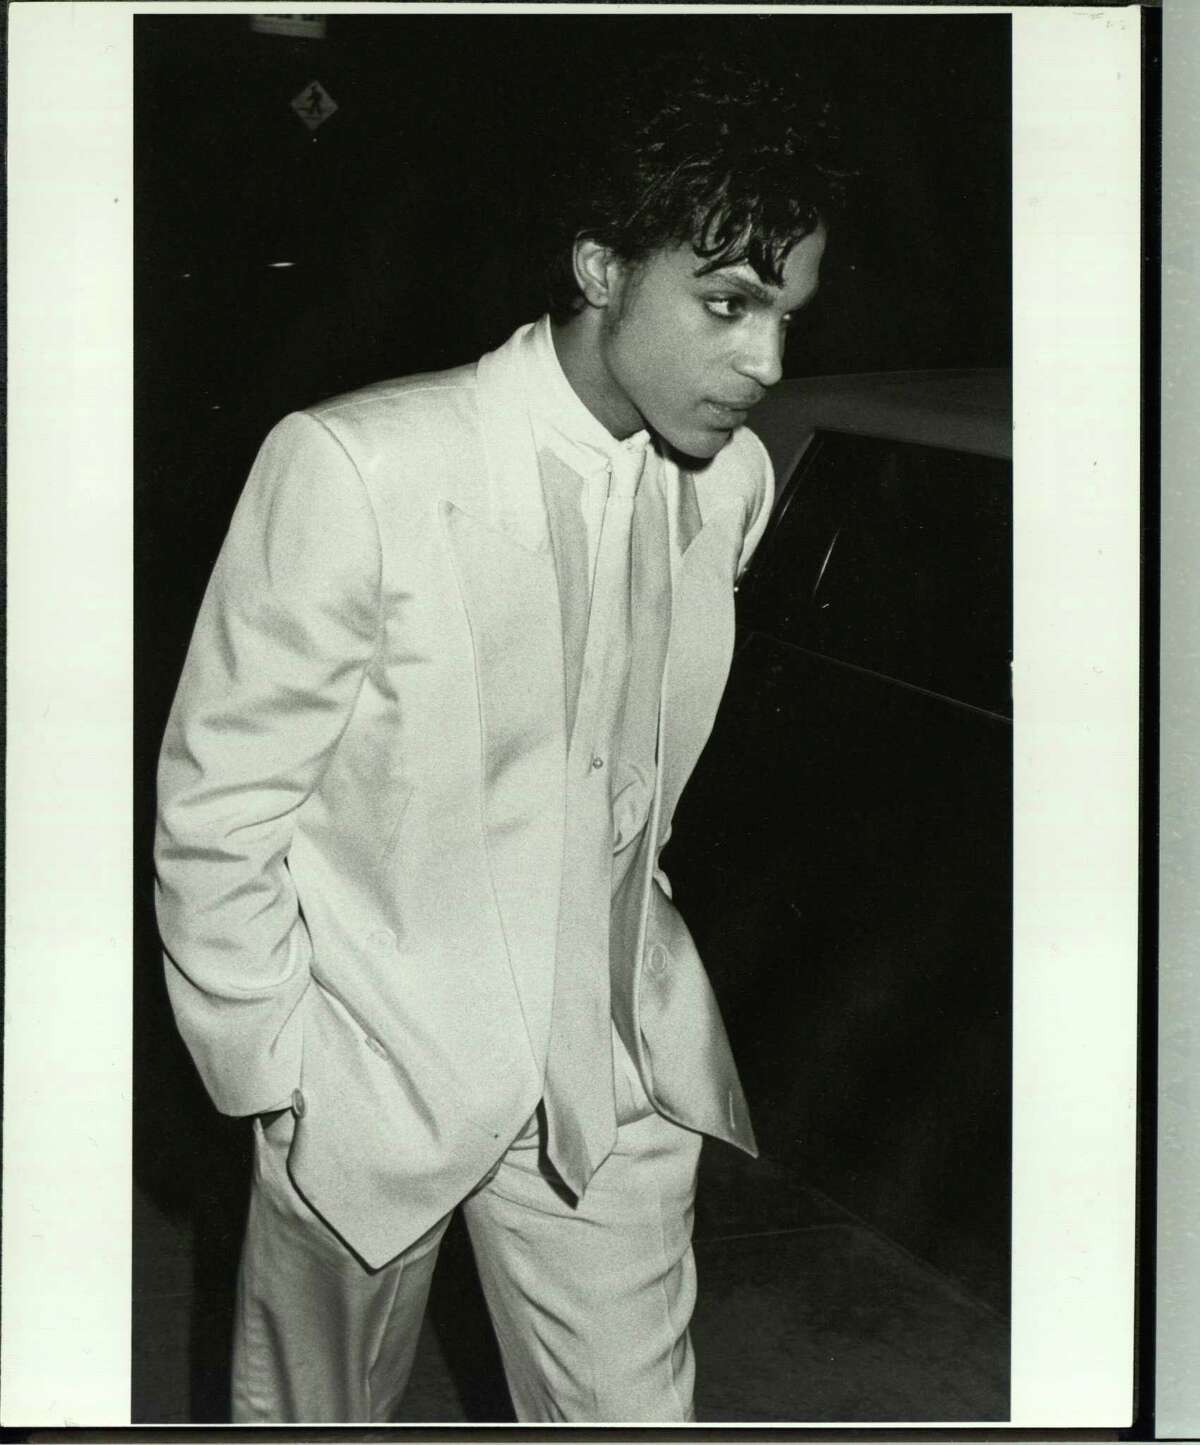 American singer, songwriter and musician Prince, circa 1985. (Photo by The LIFE Picture Collection/Getty Images)